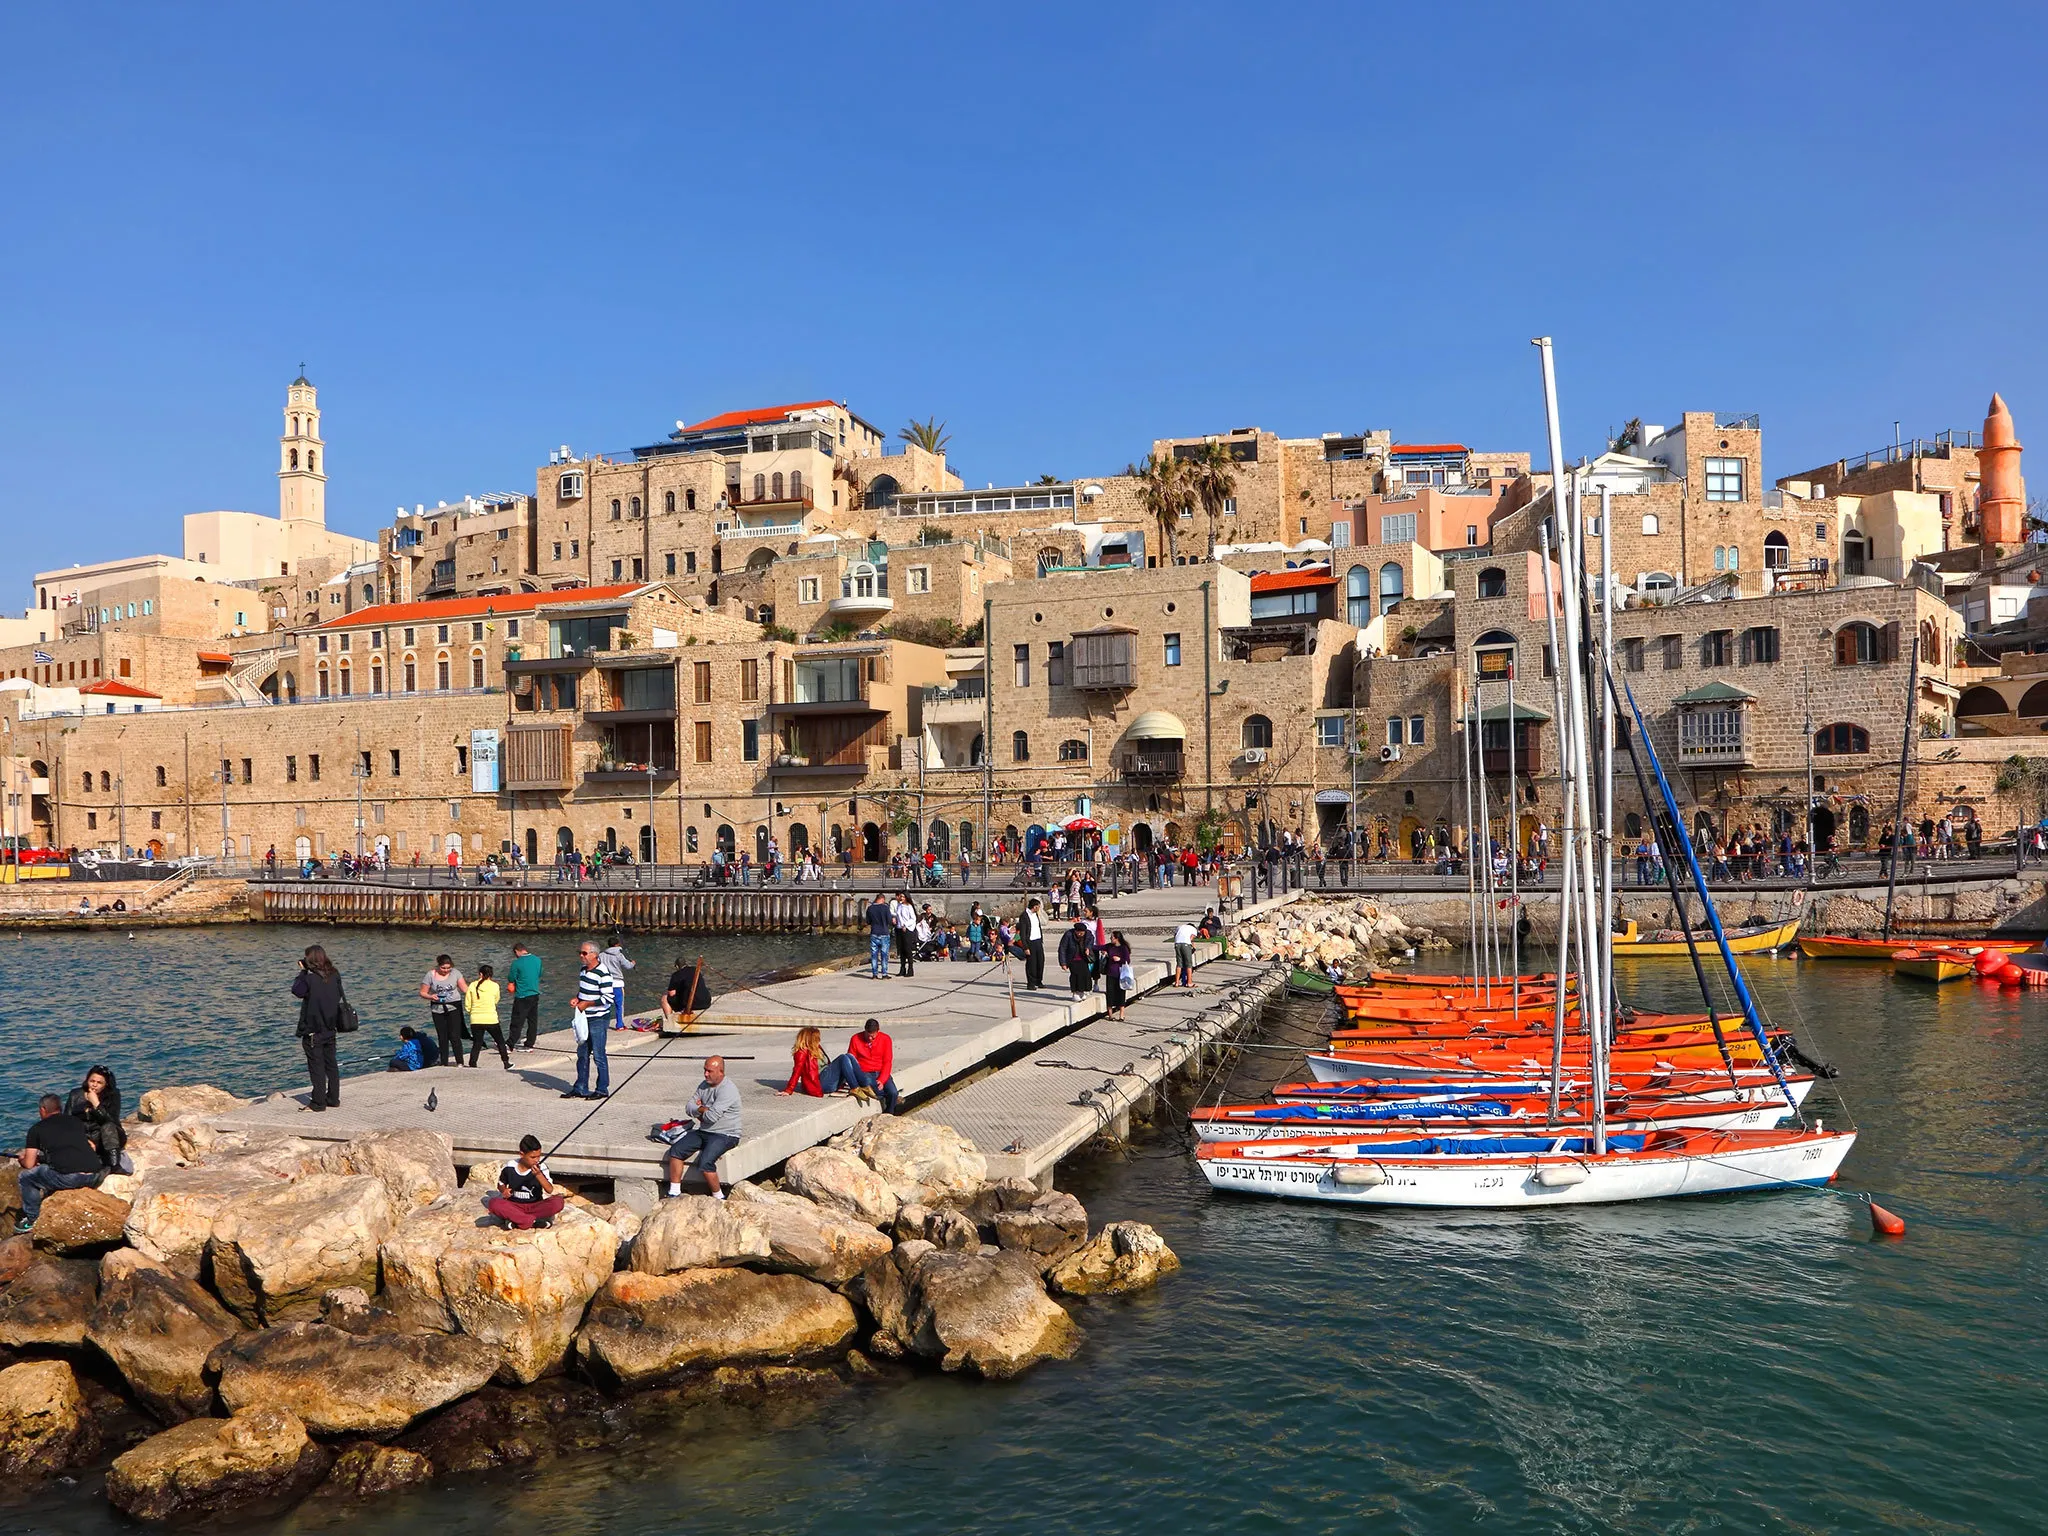 Port of Jaffa in Israel, Middle East | Architecture - Rated 3.8